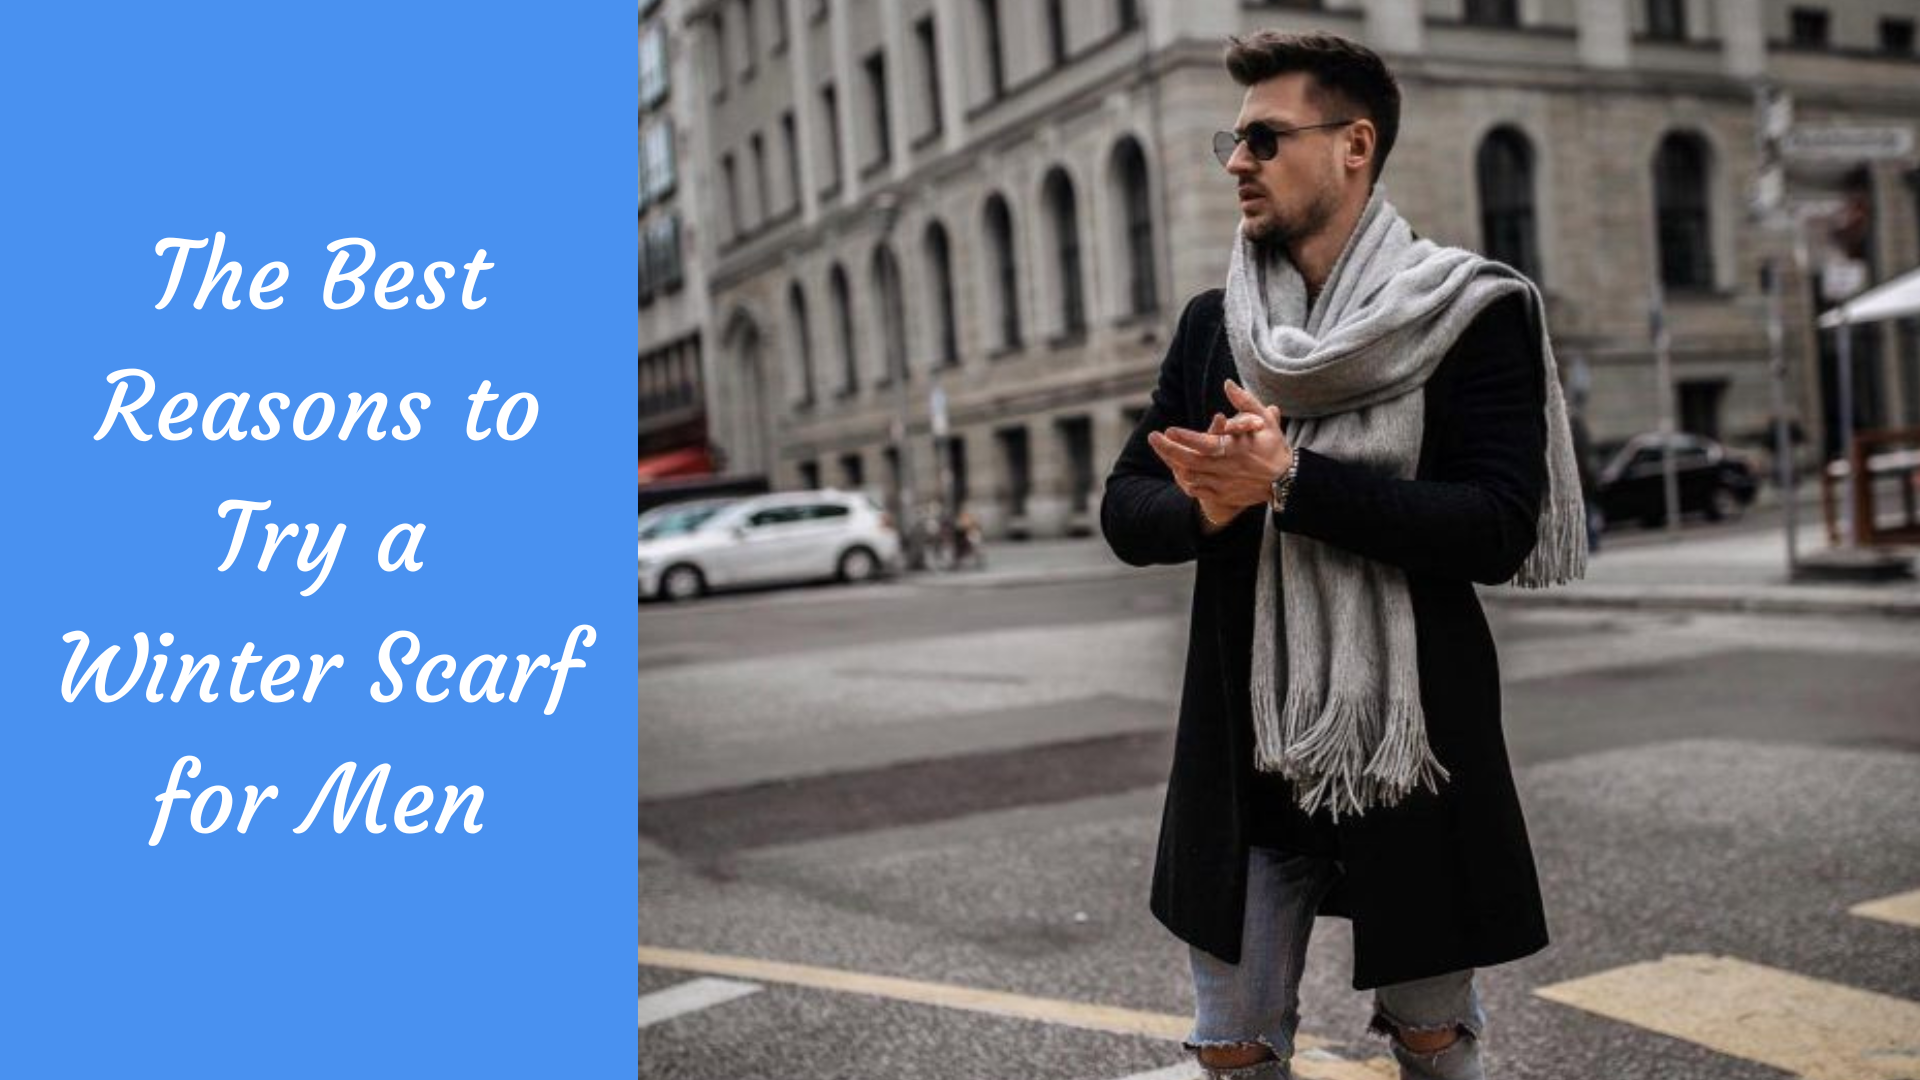 How To Wear A Scarf Men Different Styles Of Scarf For Men | vlr.eng.br